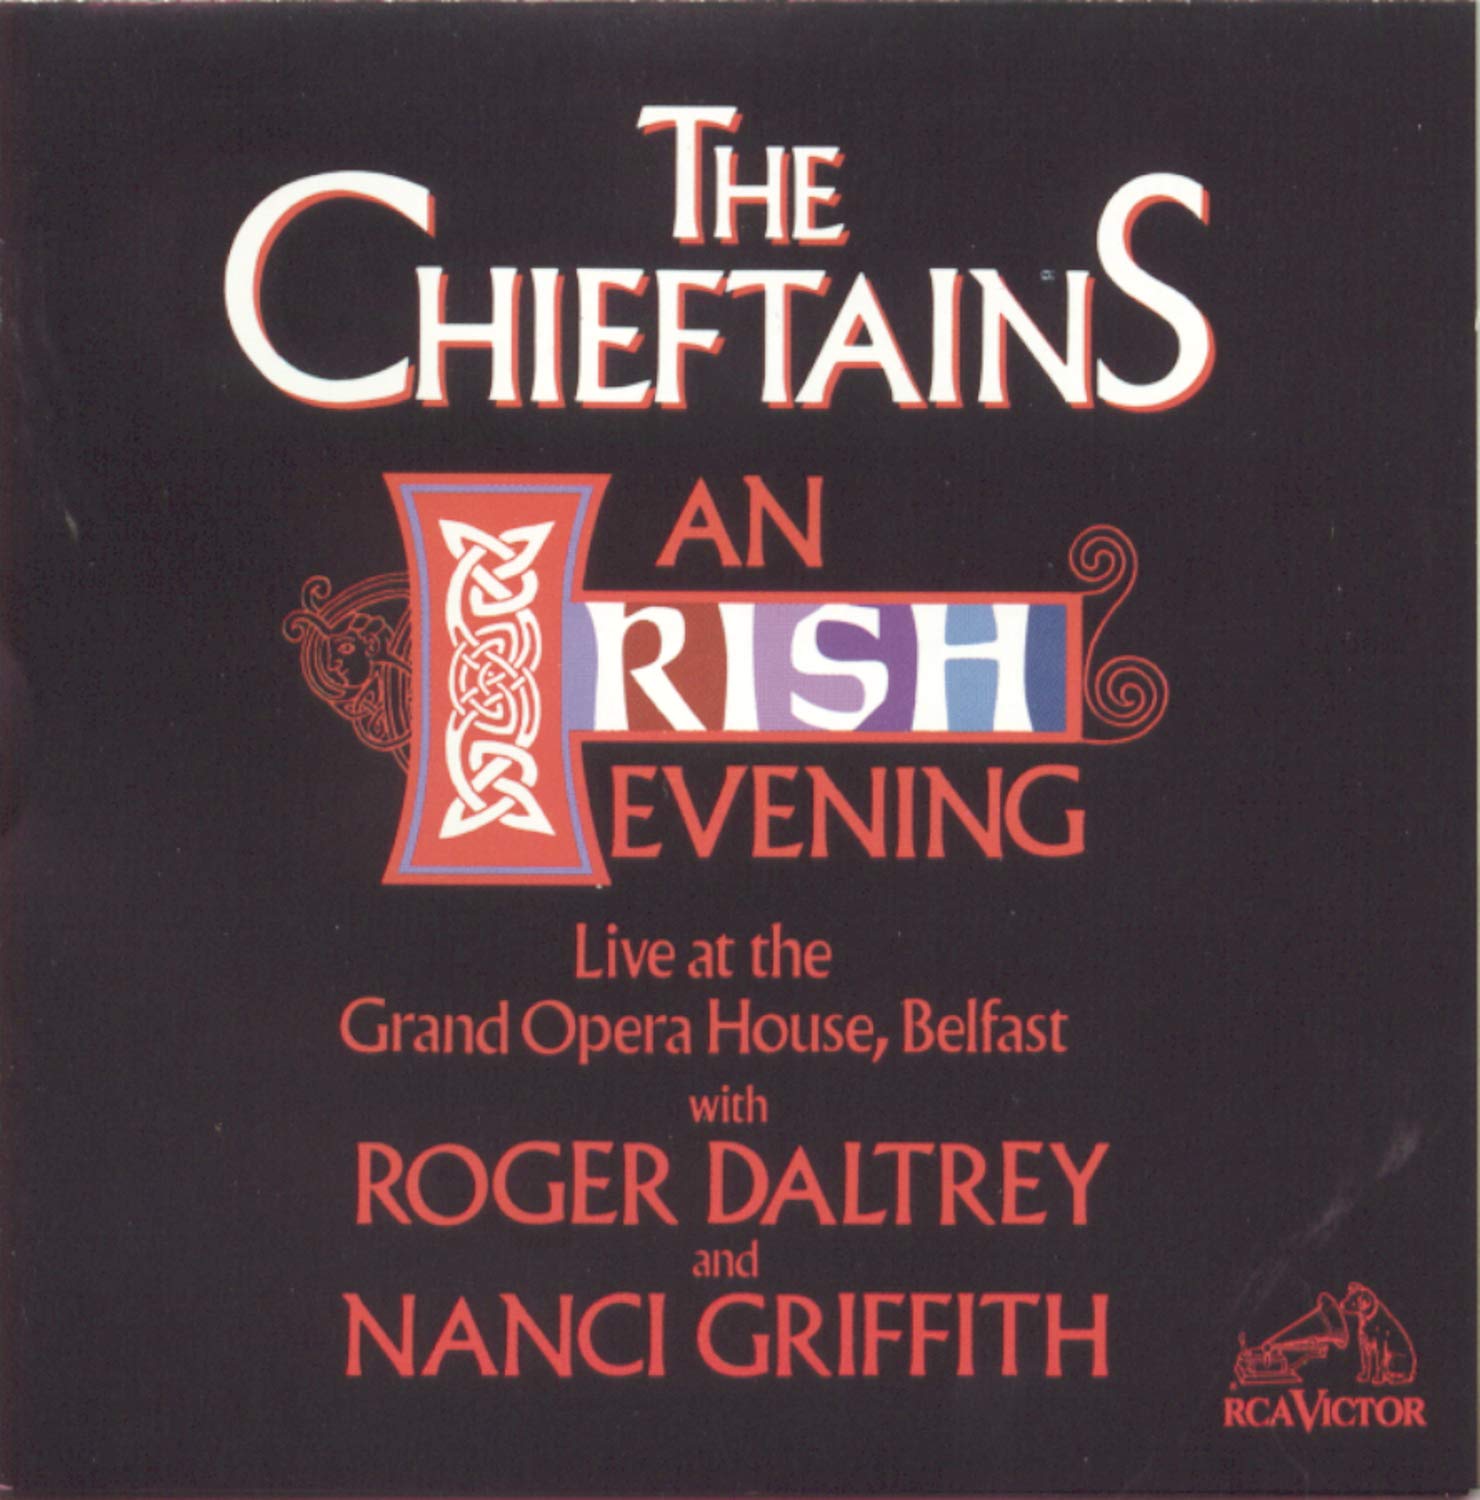 The Chieftains- An Irish Evening - Darkside Records